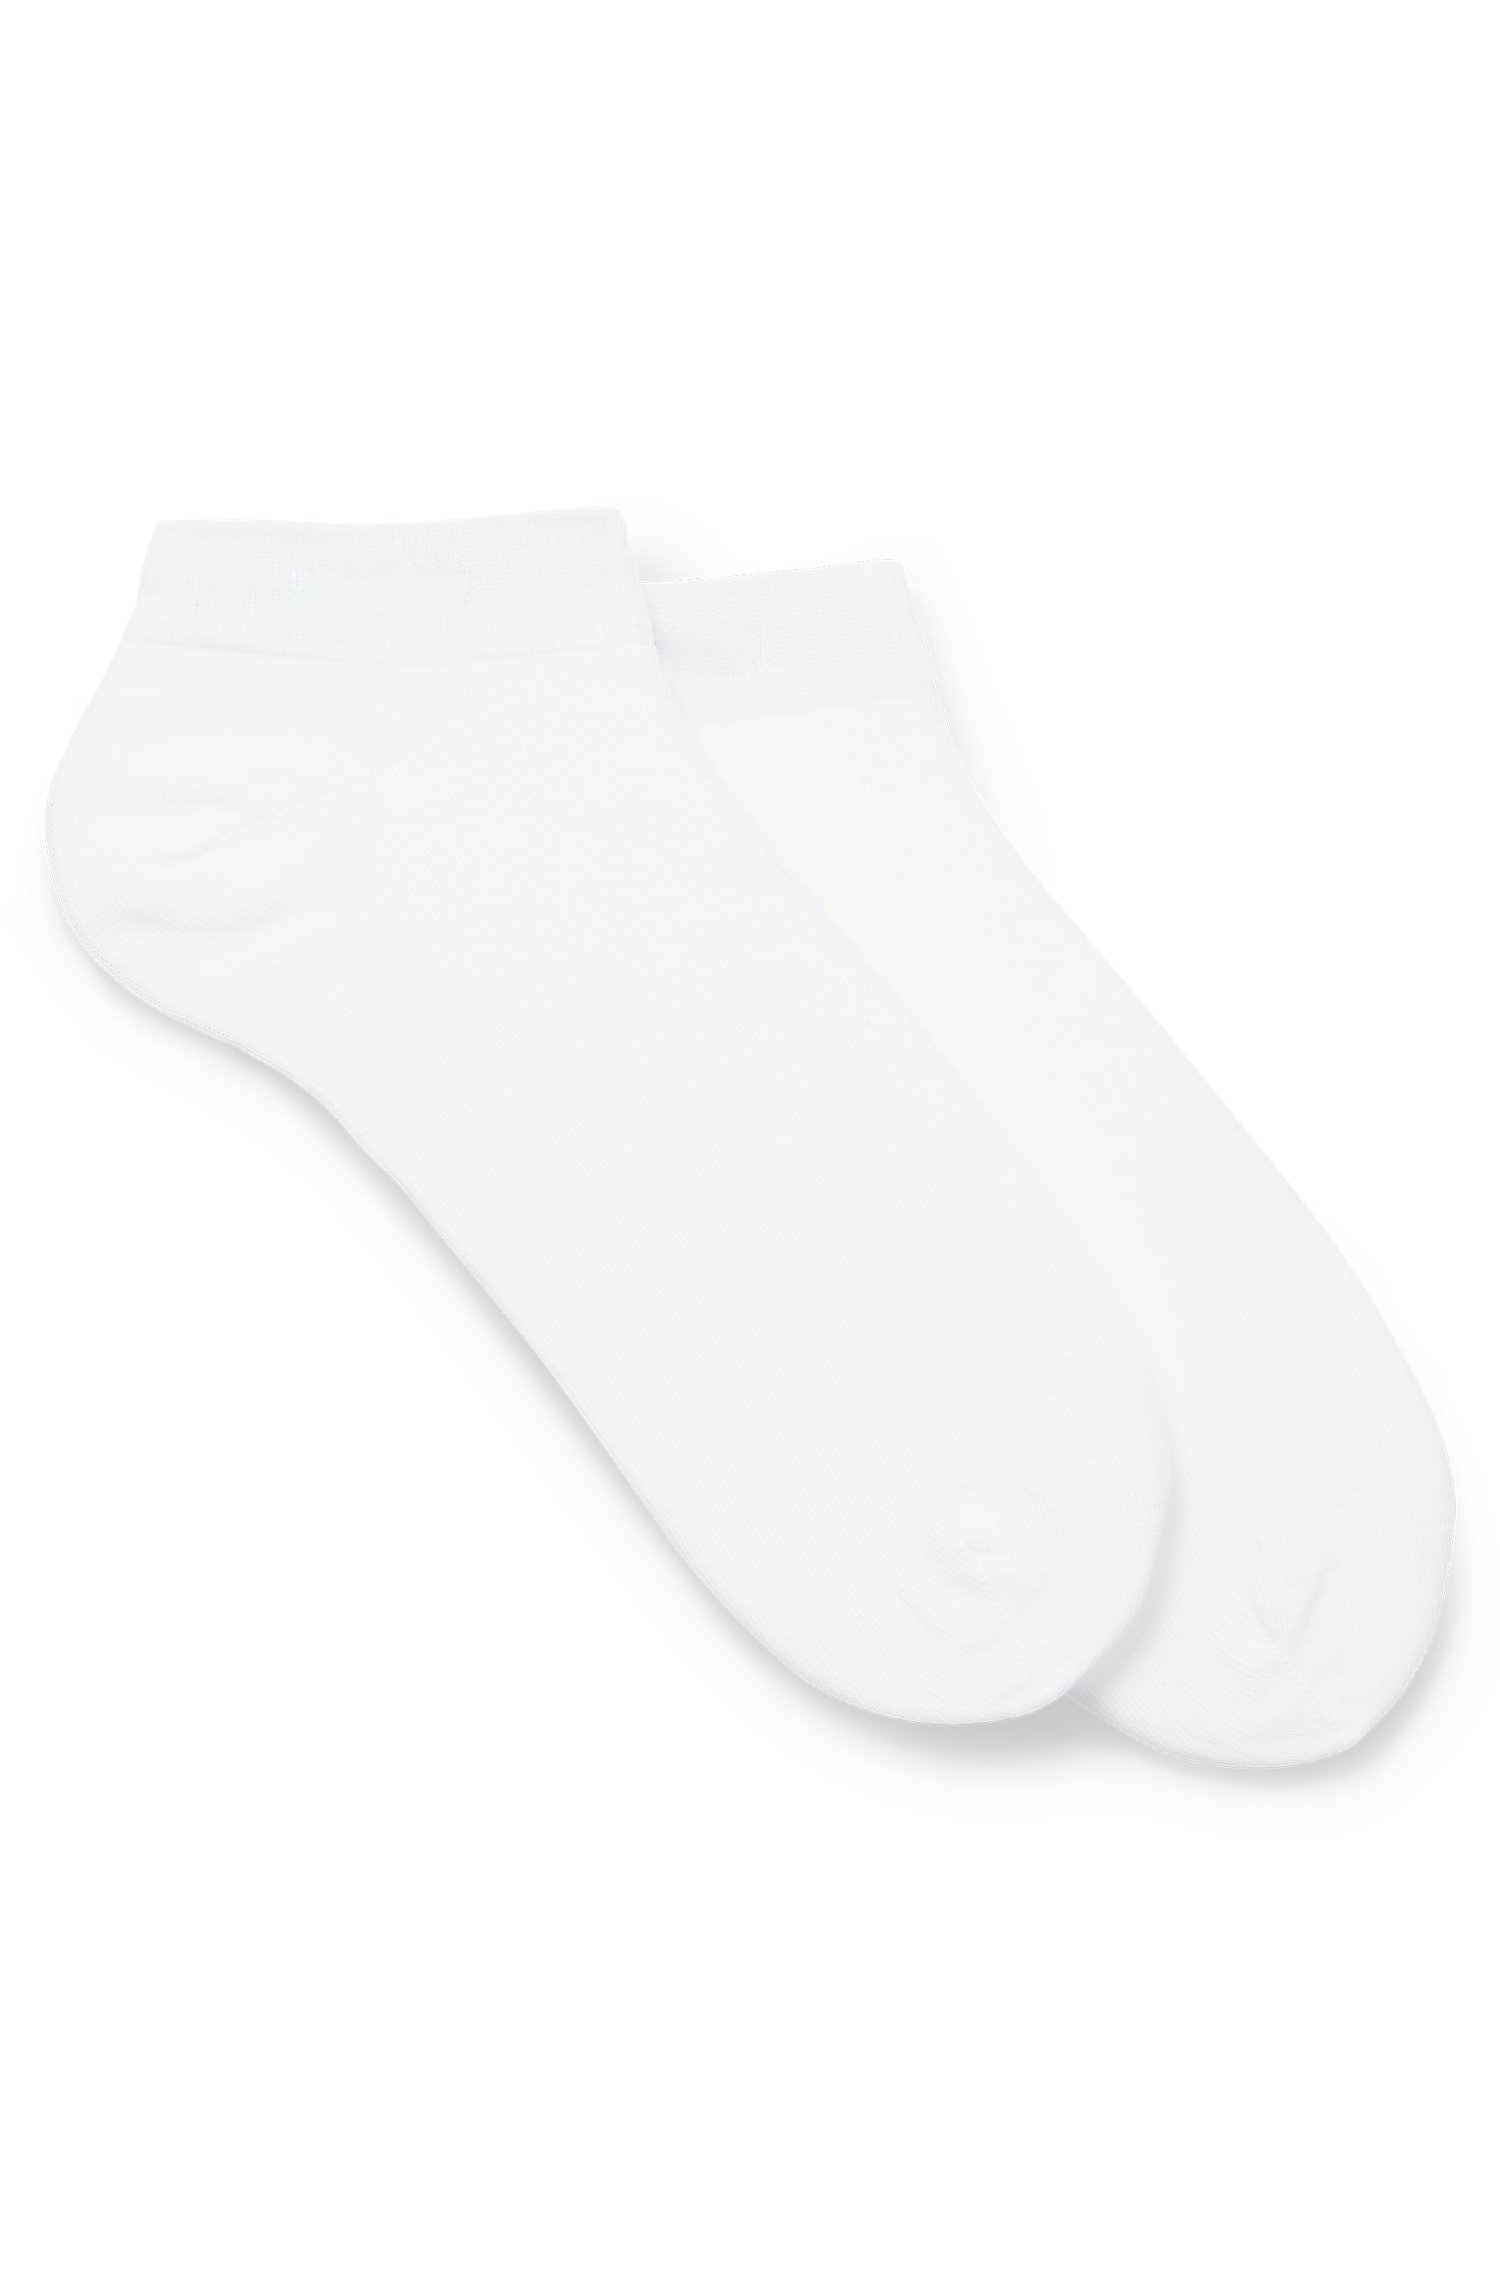 Ankle Socks in a Cotton Blend Stretchable (Pack of 2)